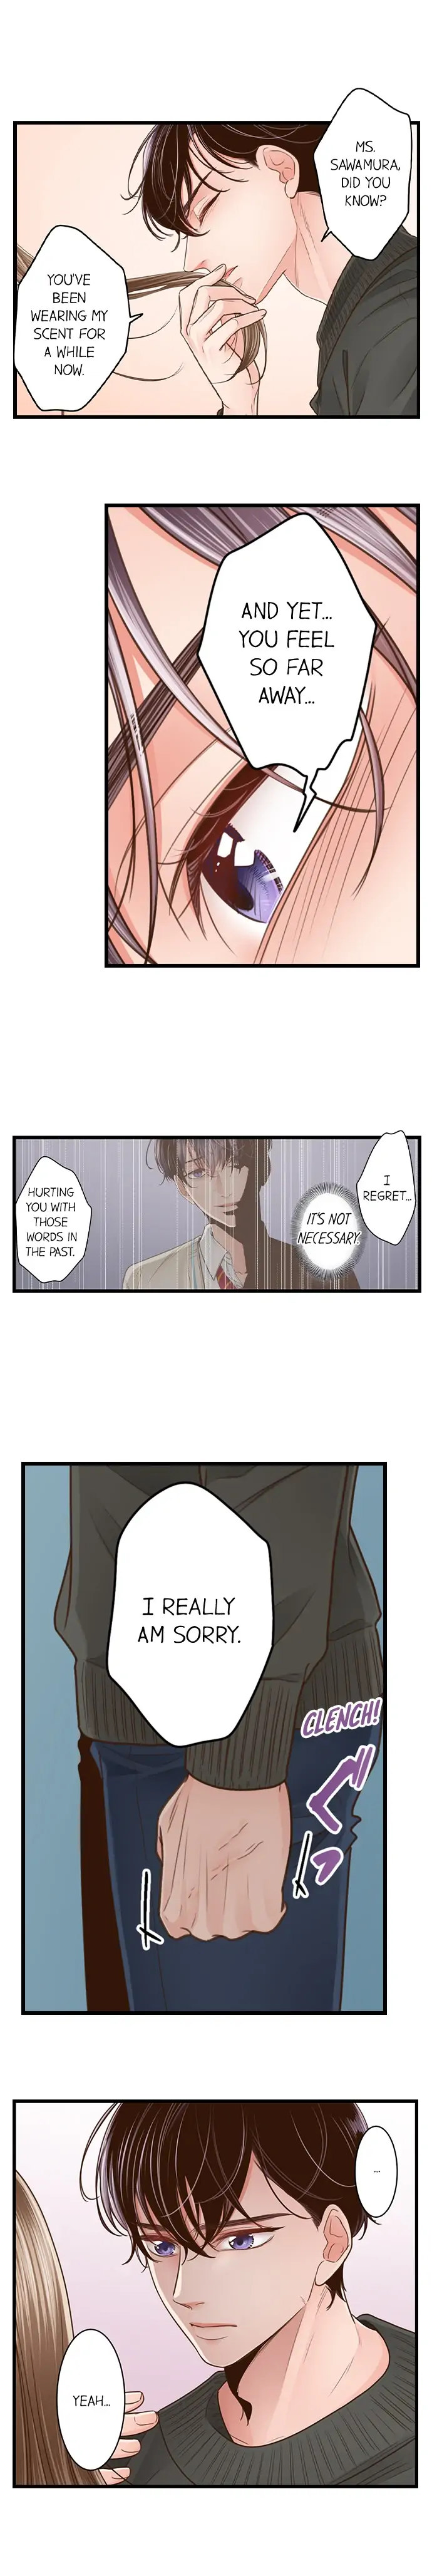 Yanagihara Is a Sex Addict - Chapter 198 Page 2